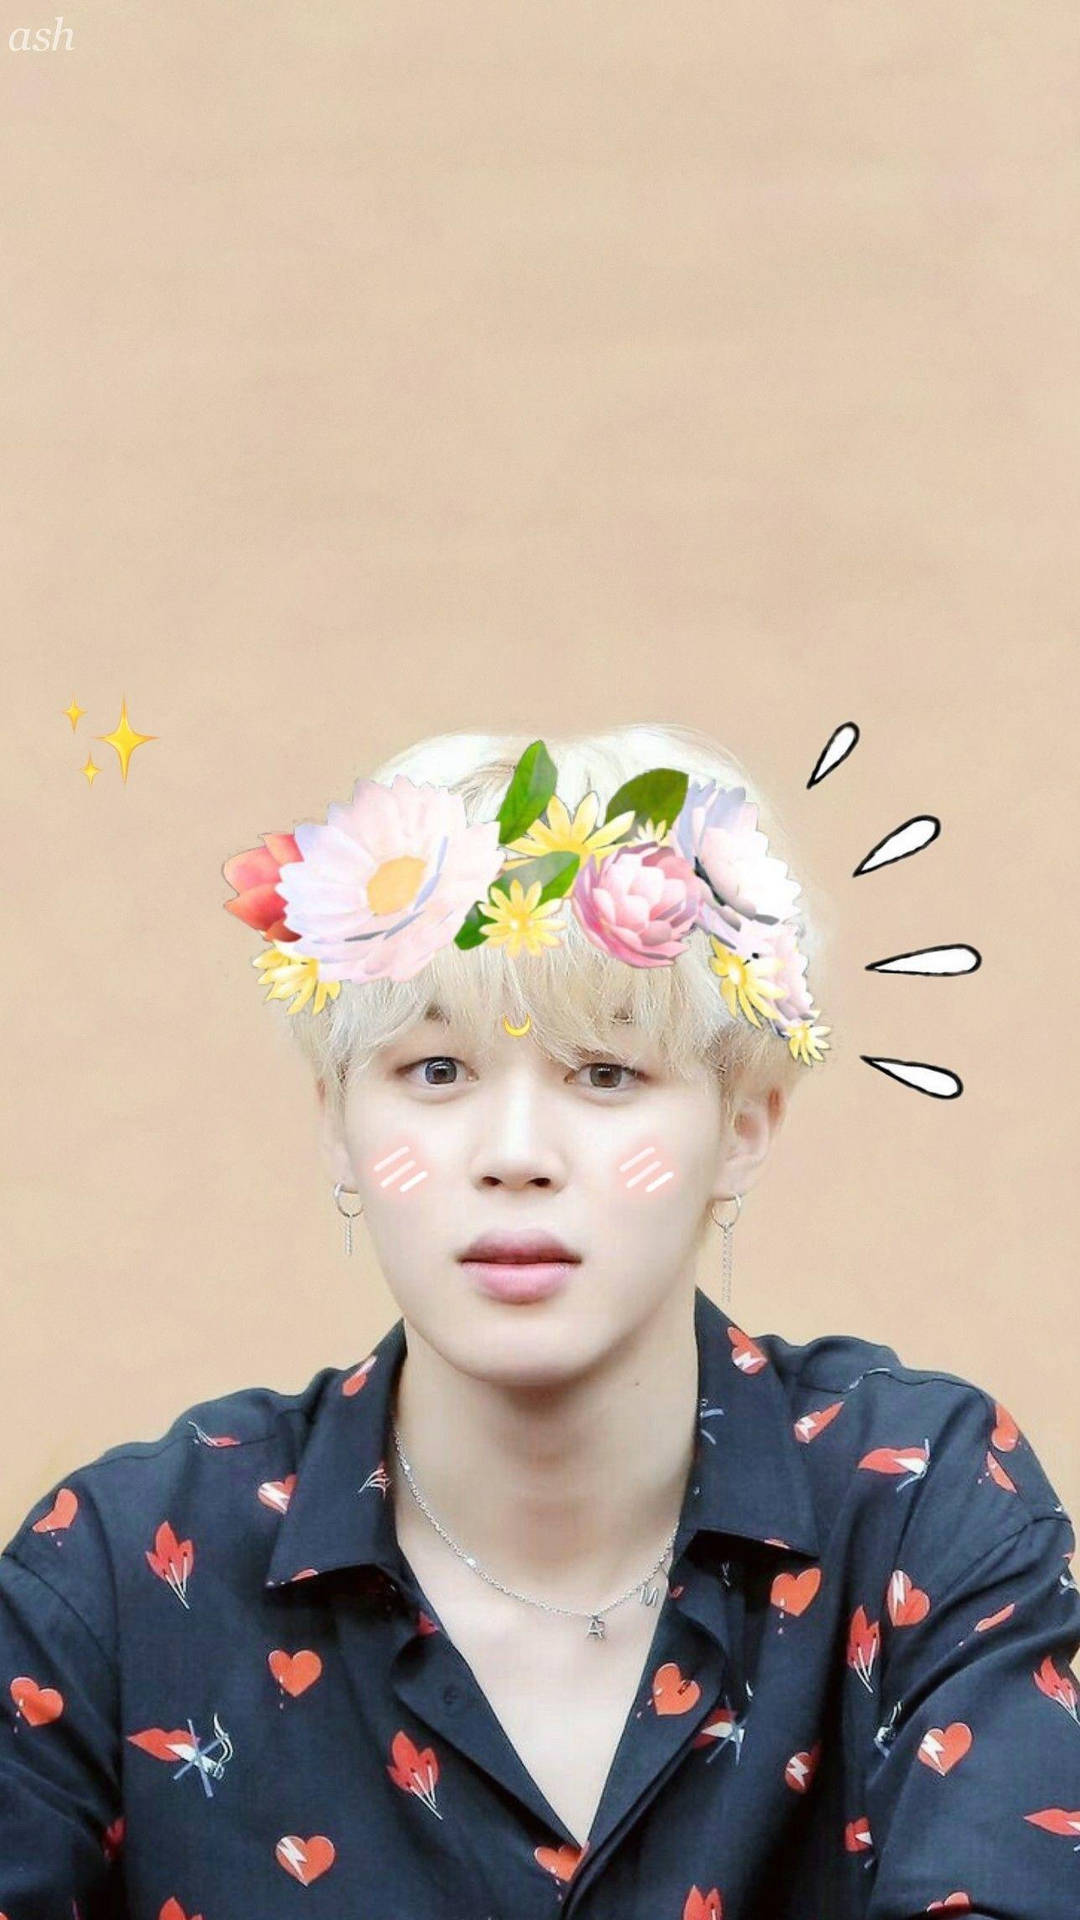 Jimin Bts Cutely Surprised Background